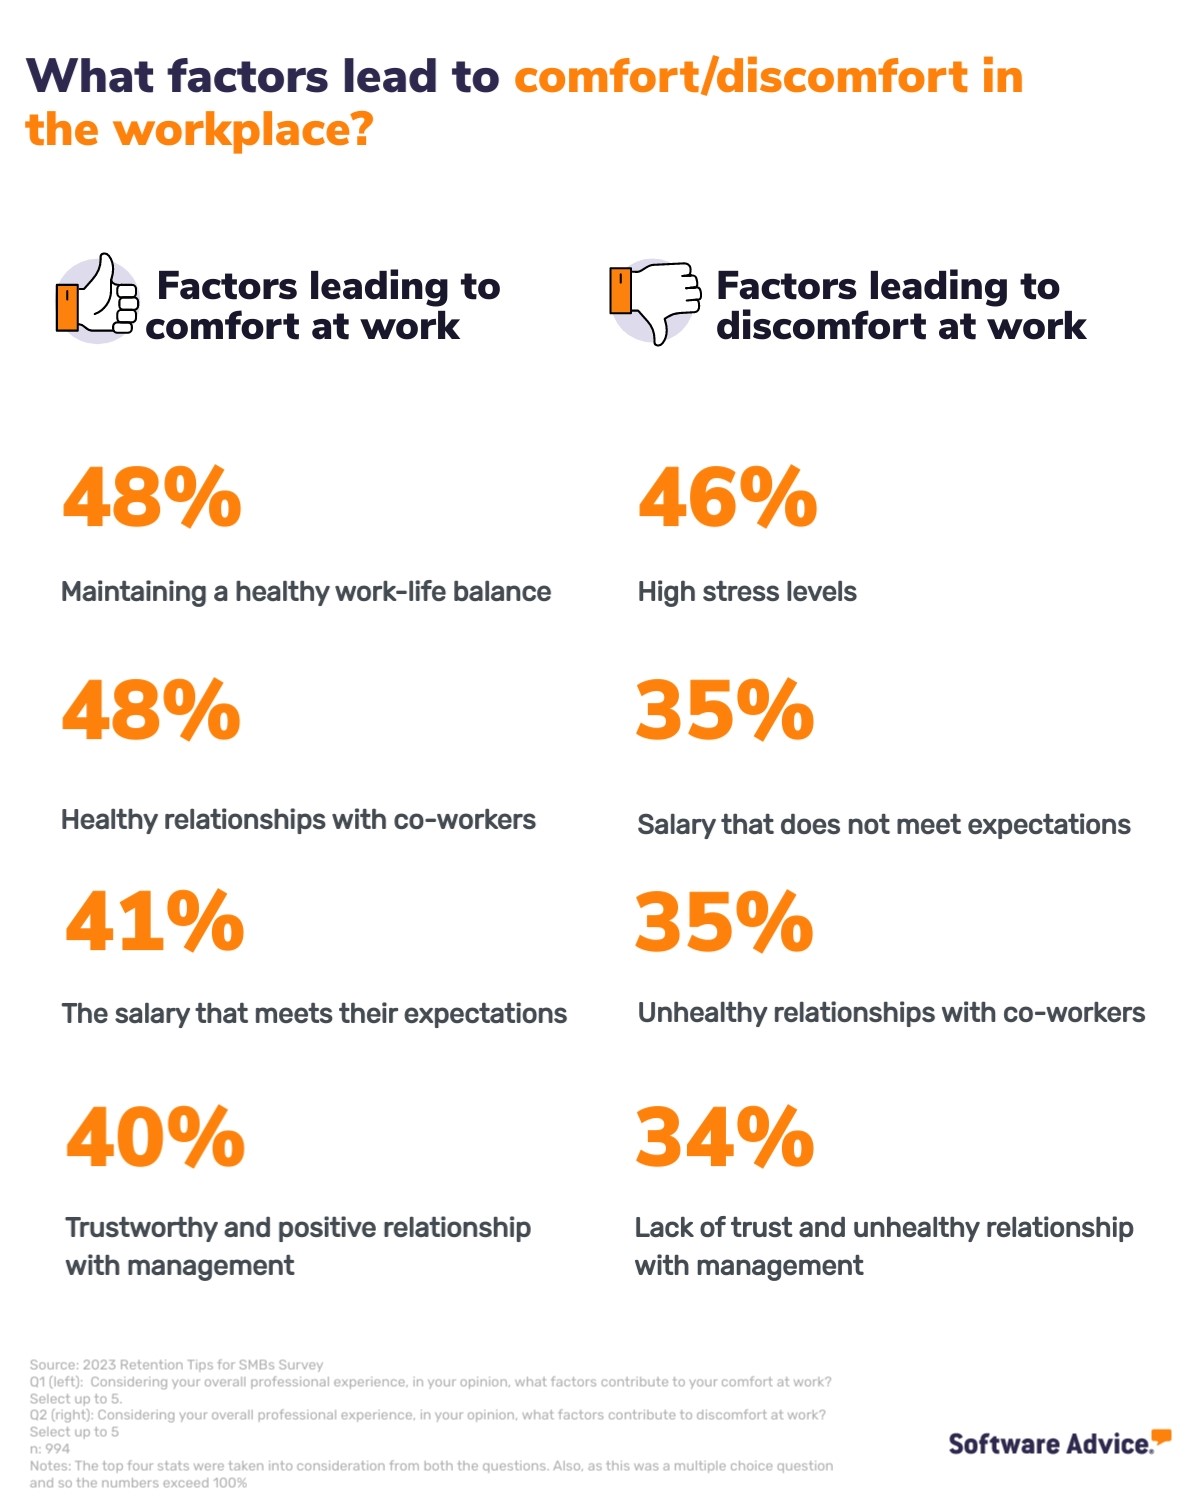 Top factors leading to comfort/discomfort in the workplace